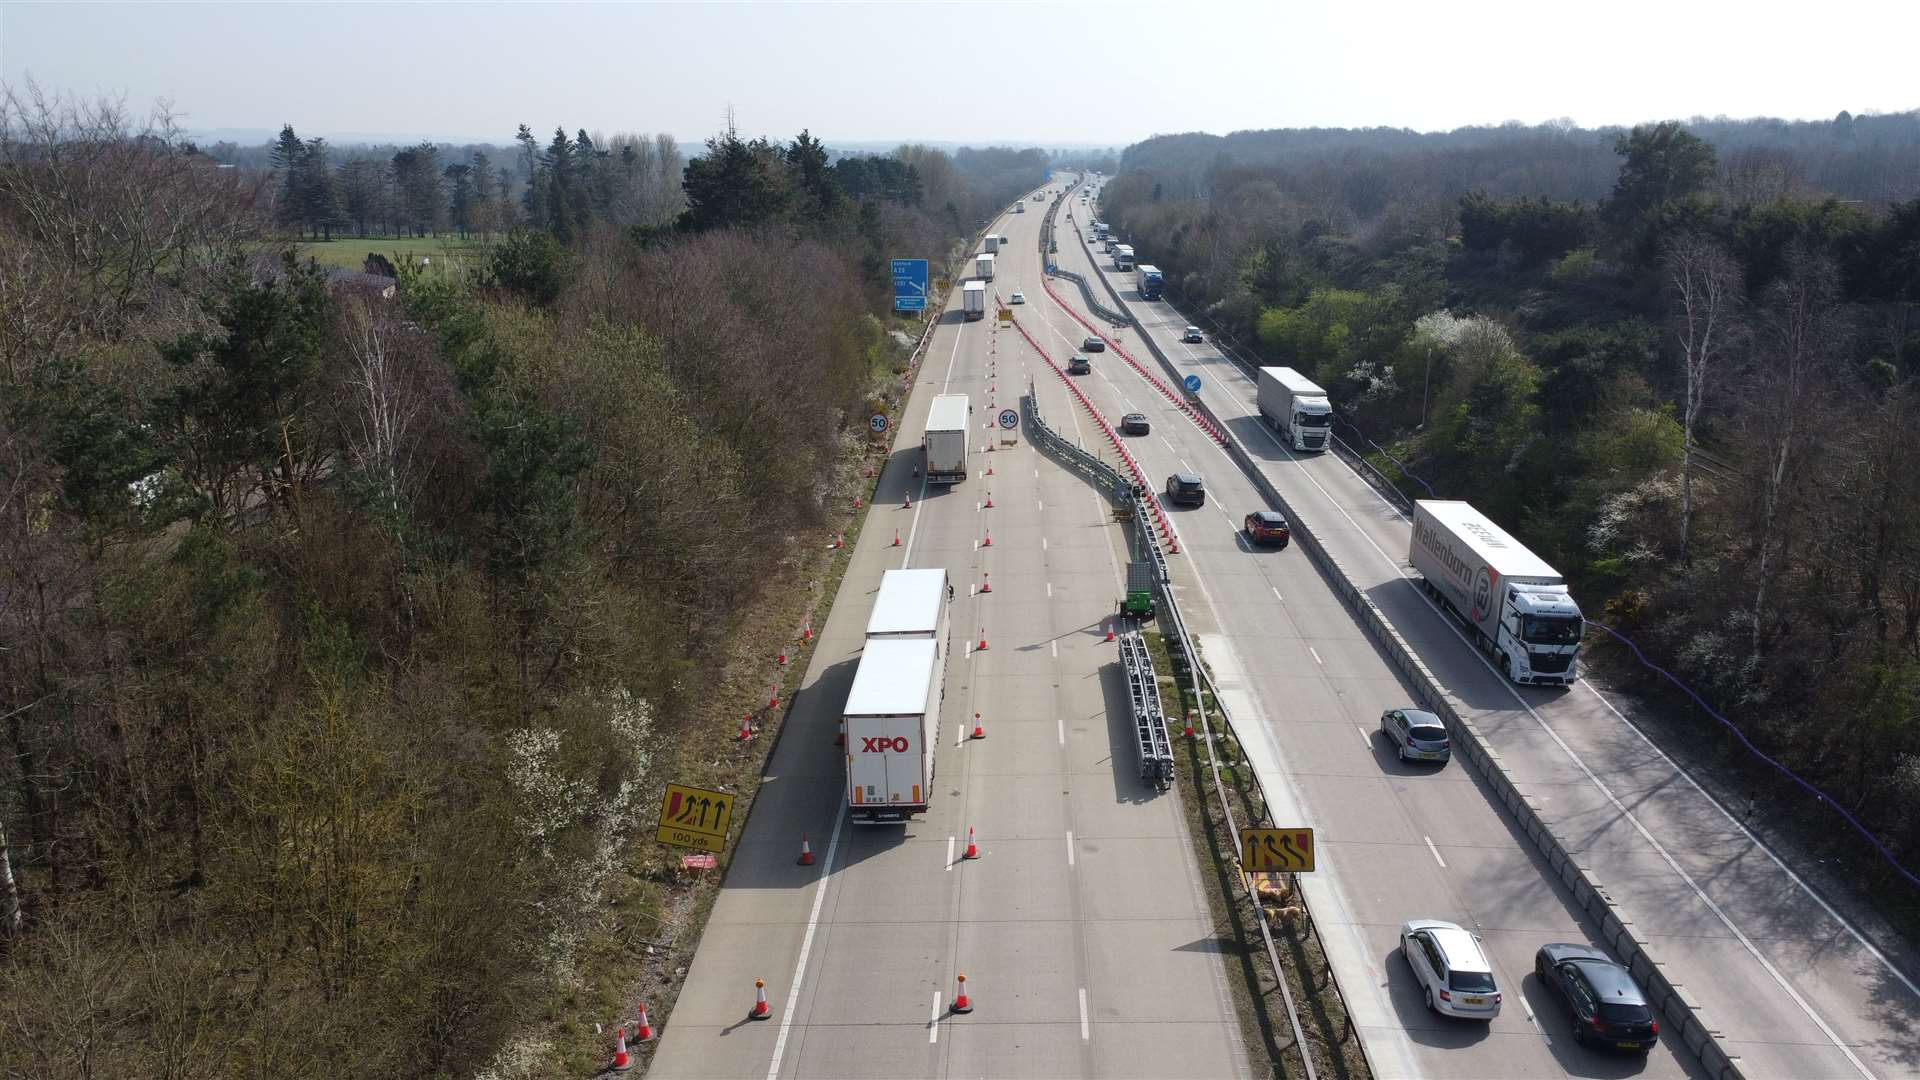 Operation Brock will be deployed on the M20 in a bid to ease traffic flow during the Easter holidays